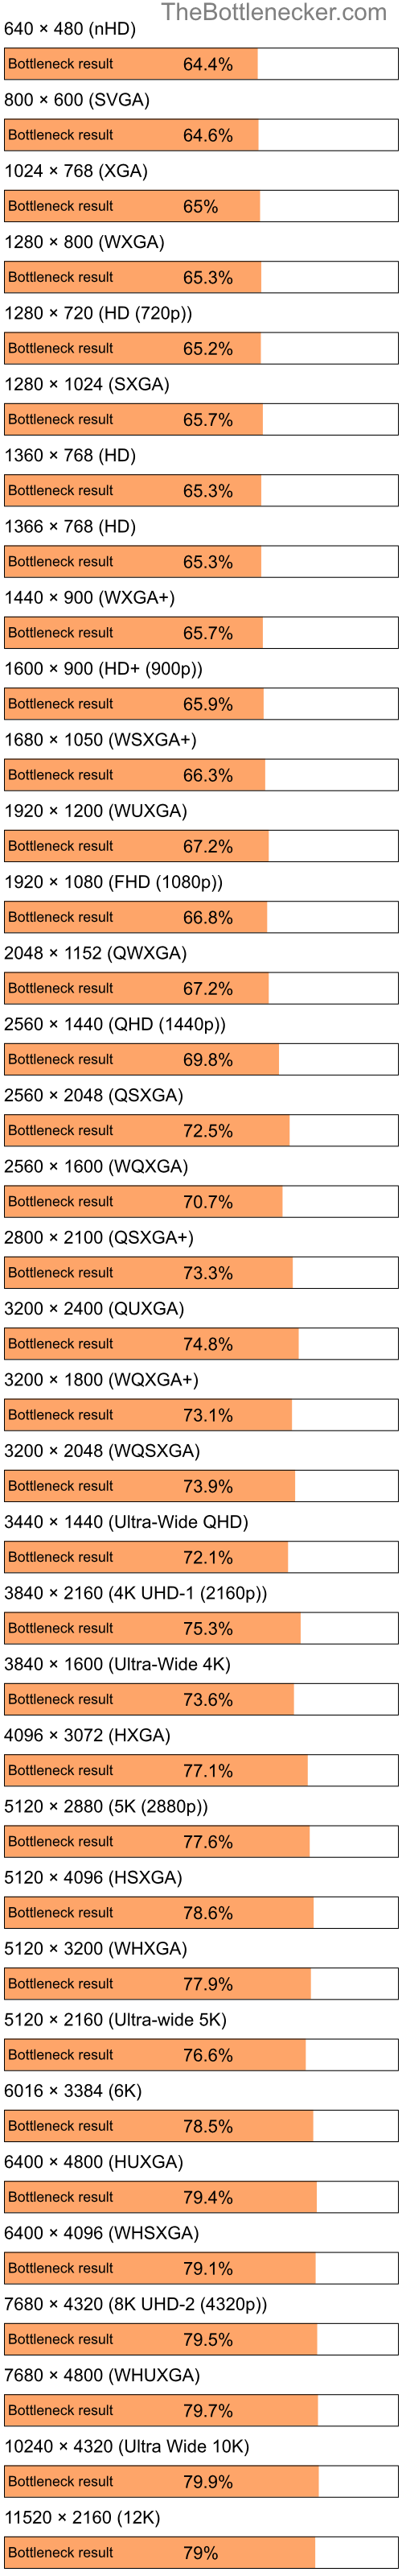 Bottleneck results by resolution for Intel Atom Z520 and NVIDIA Quadro NVS 135M in Processor Intense Tasks